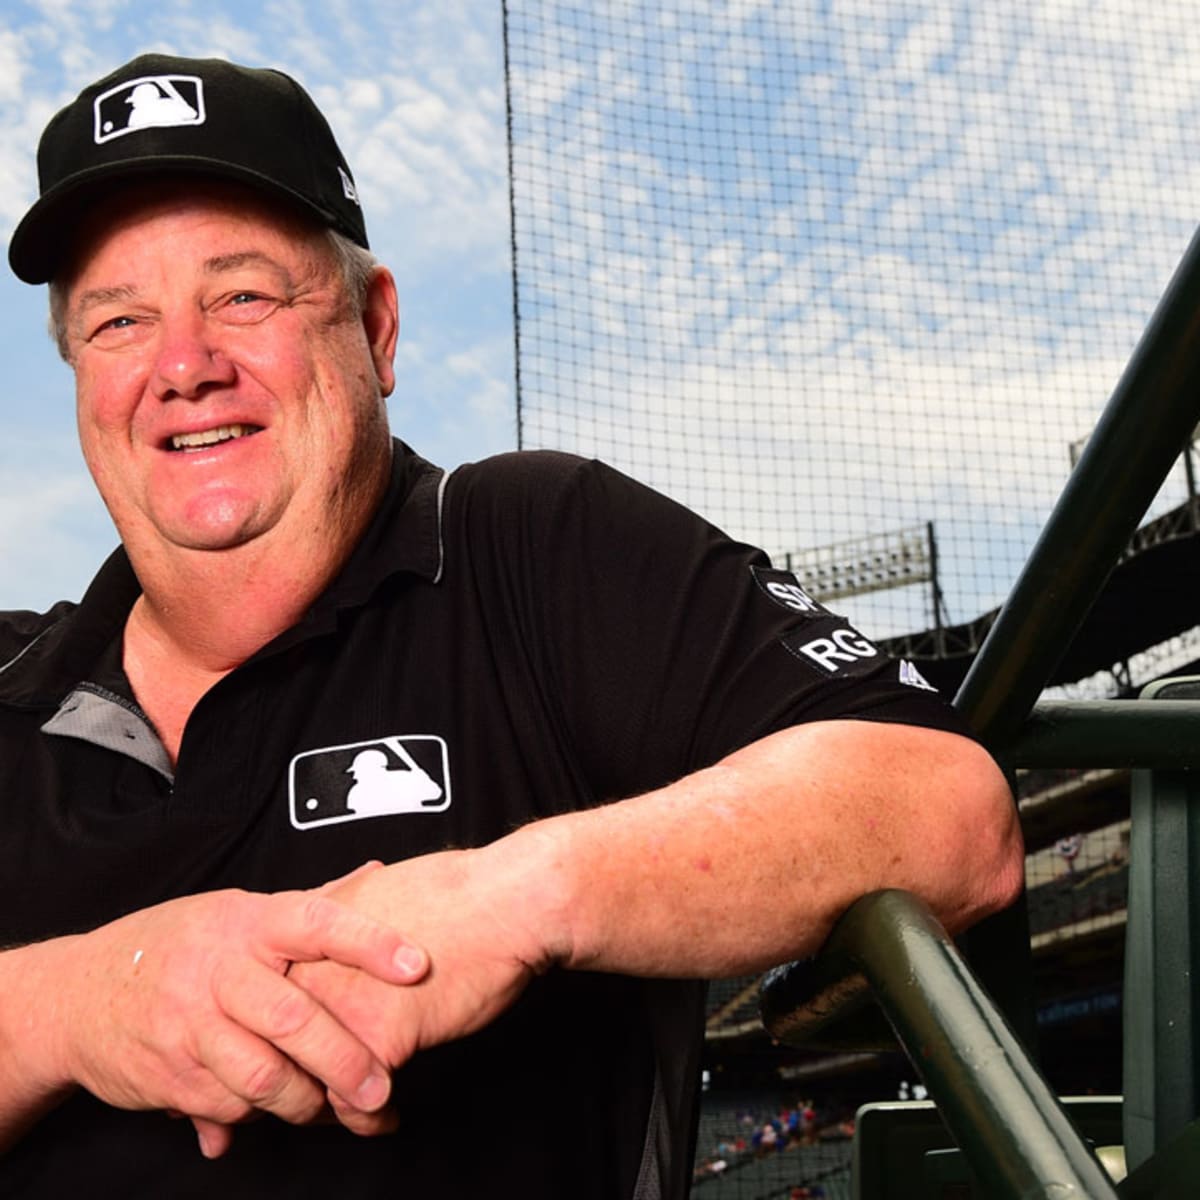 MLB umpire Joe West officially retires after 45 years - Sports Illustrated